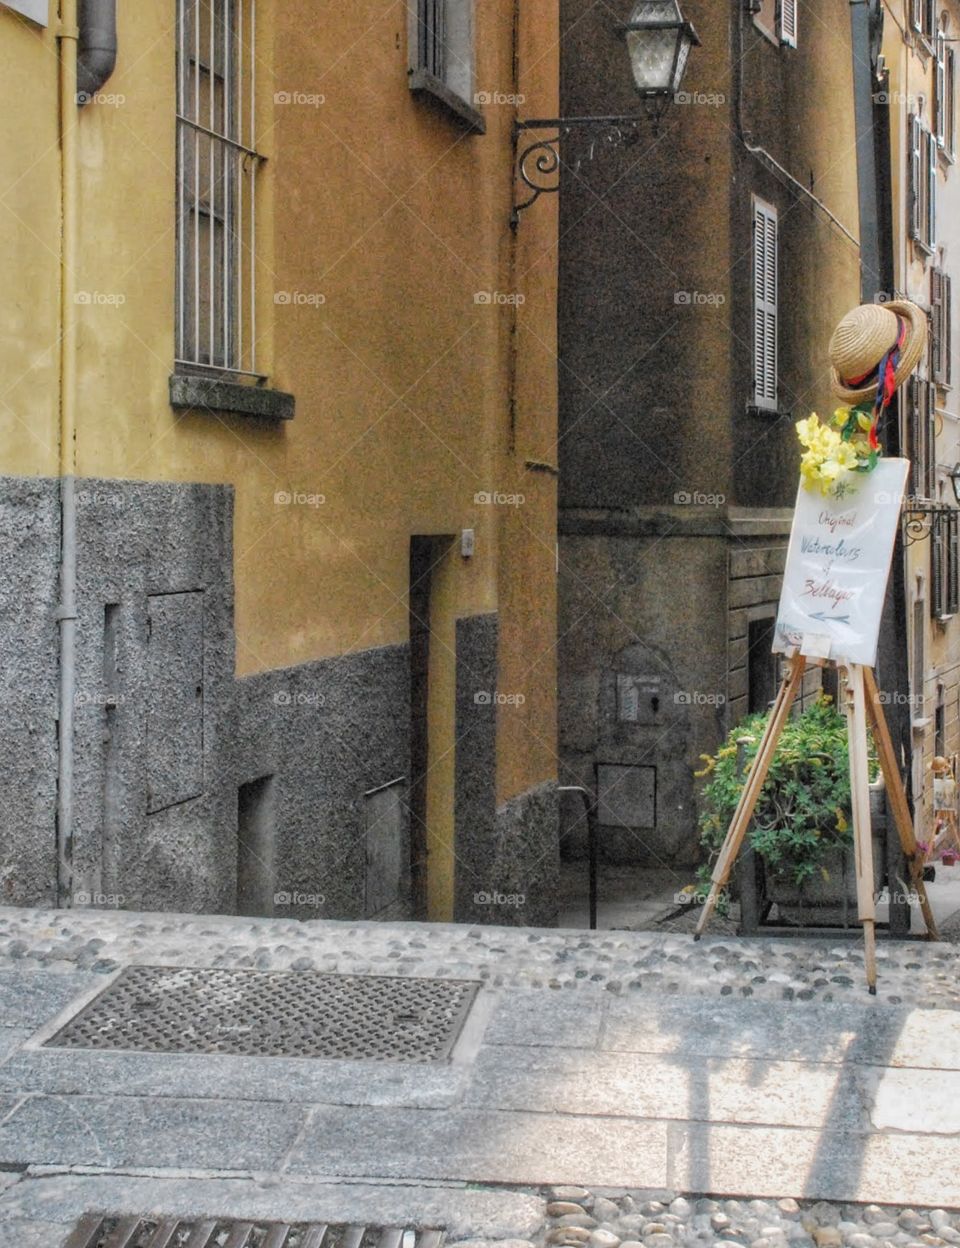 Sign with a hat. A cobblestone walkway in a small Italian village with a sign decorated with the hat and flowers